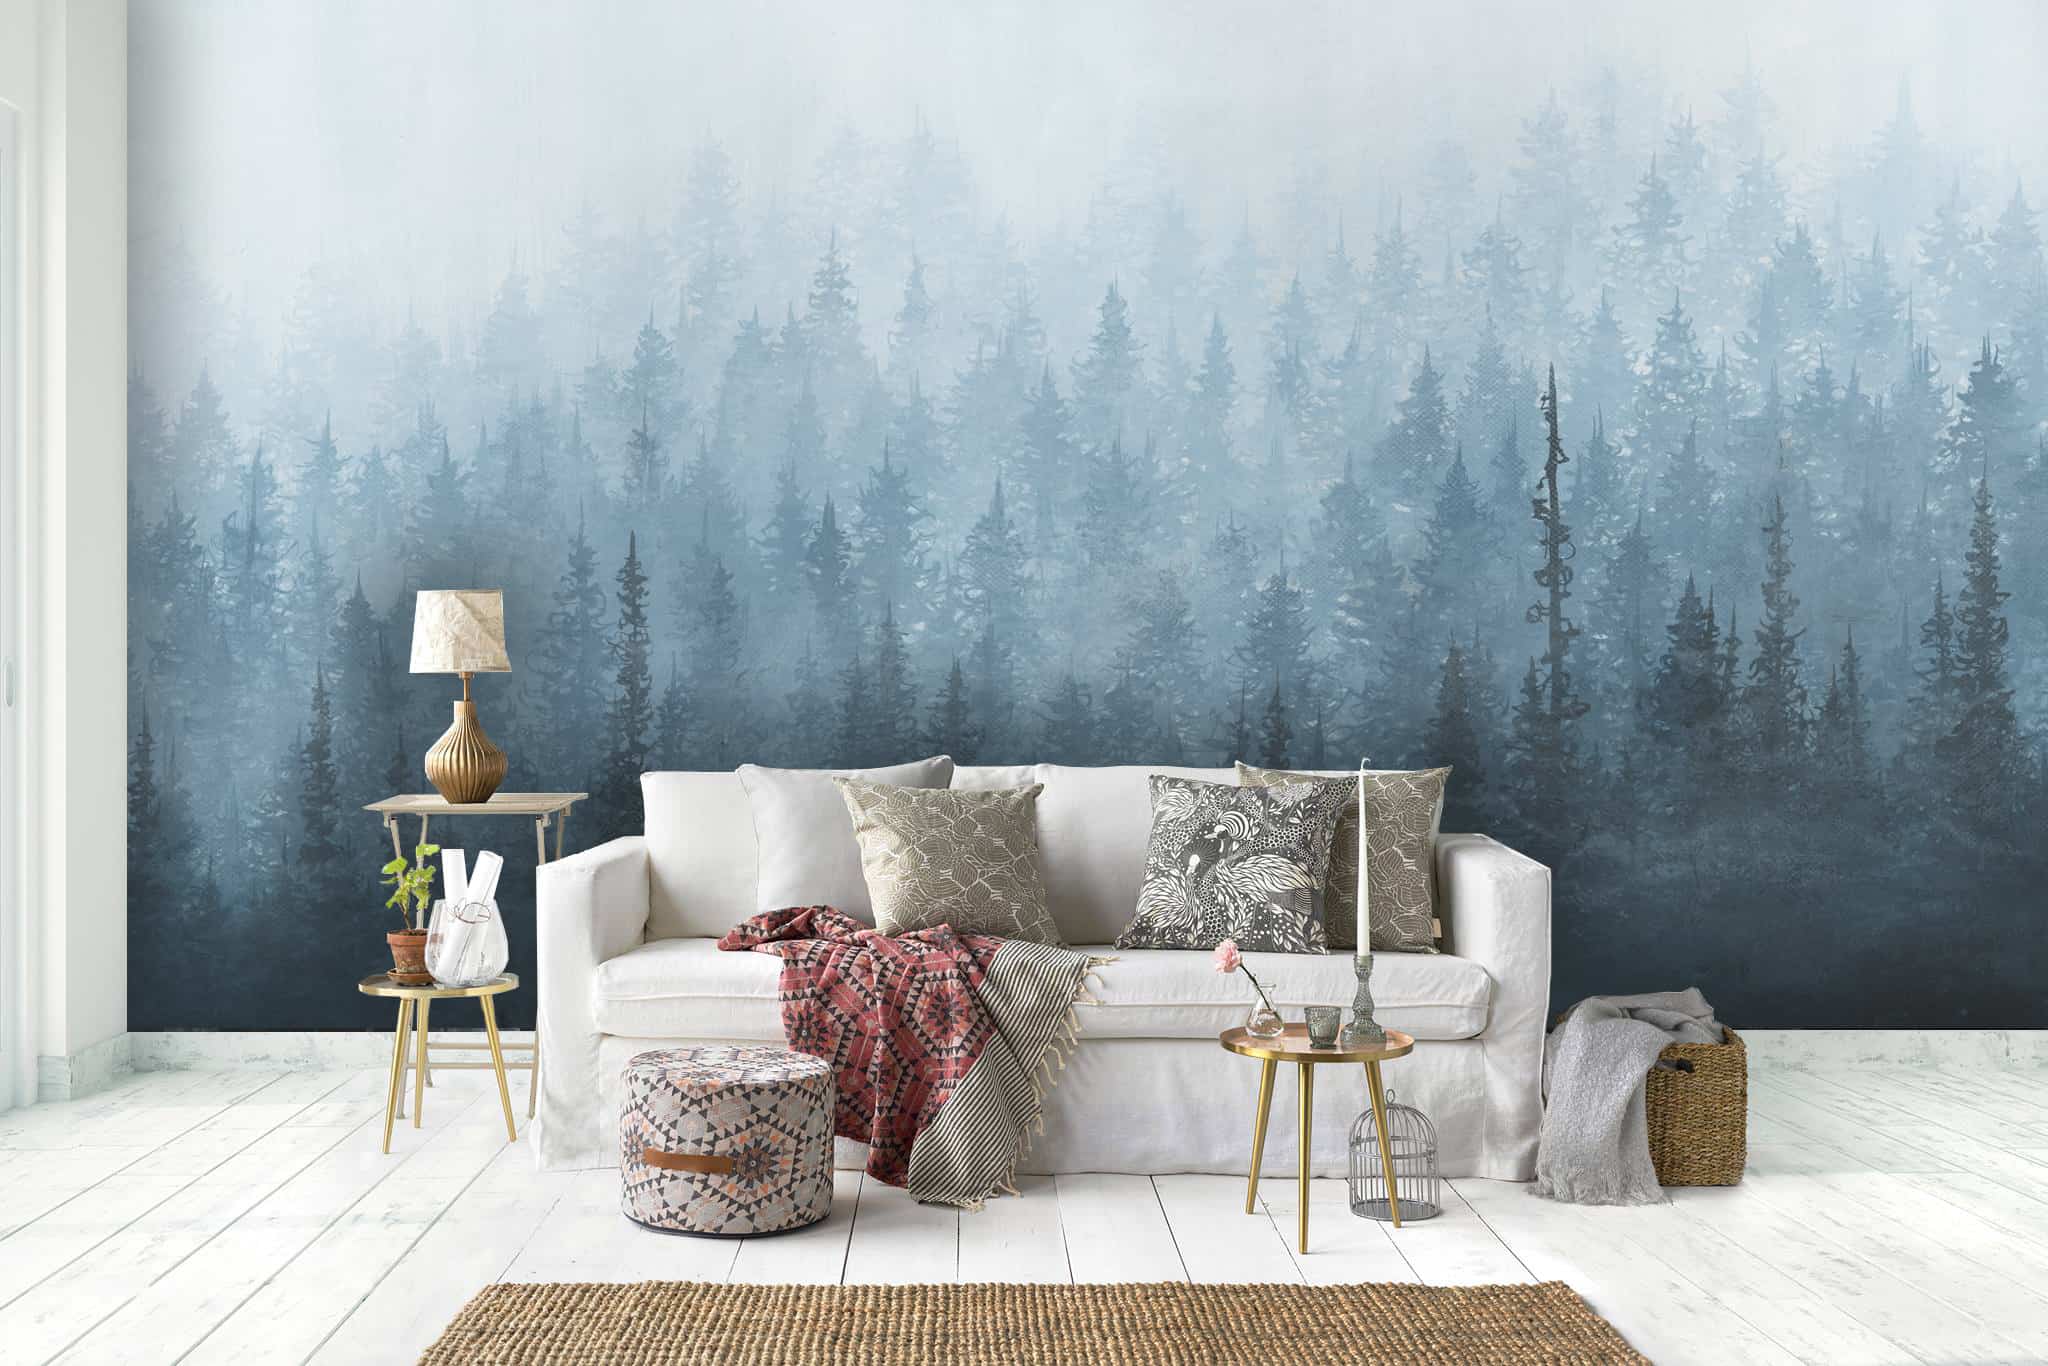 Free download Forest Wall Mural Diy Images Uk Painting Art Nursery For